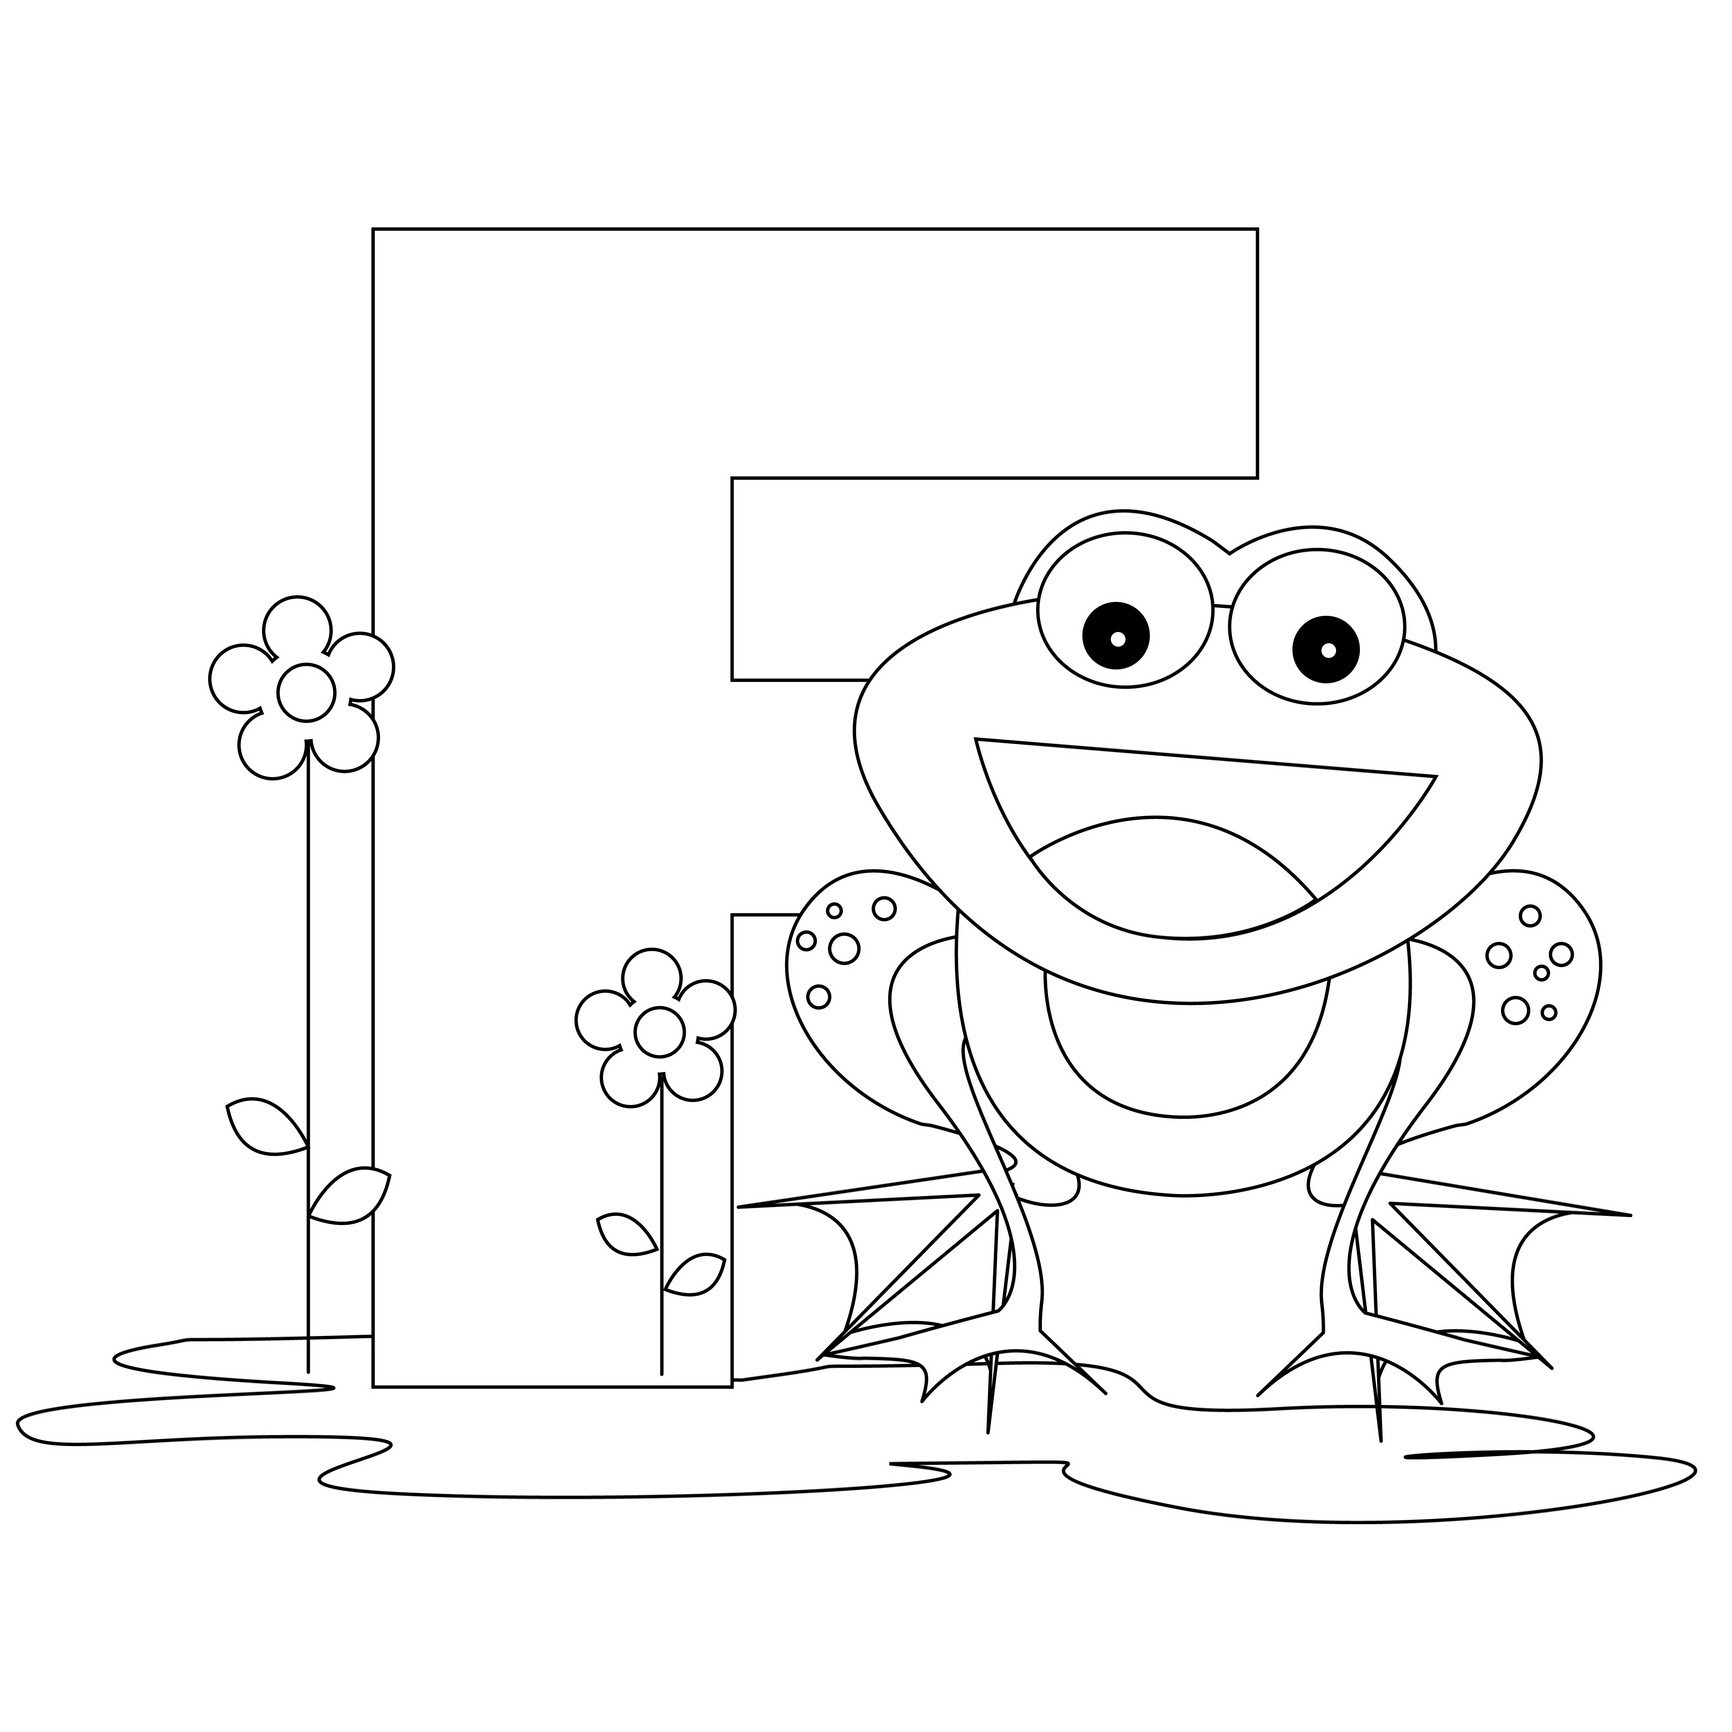 Alphabet Coloring Pages Free
 Free Printable Alphabet Coloring Pages for Kids Best